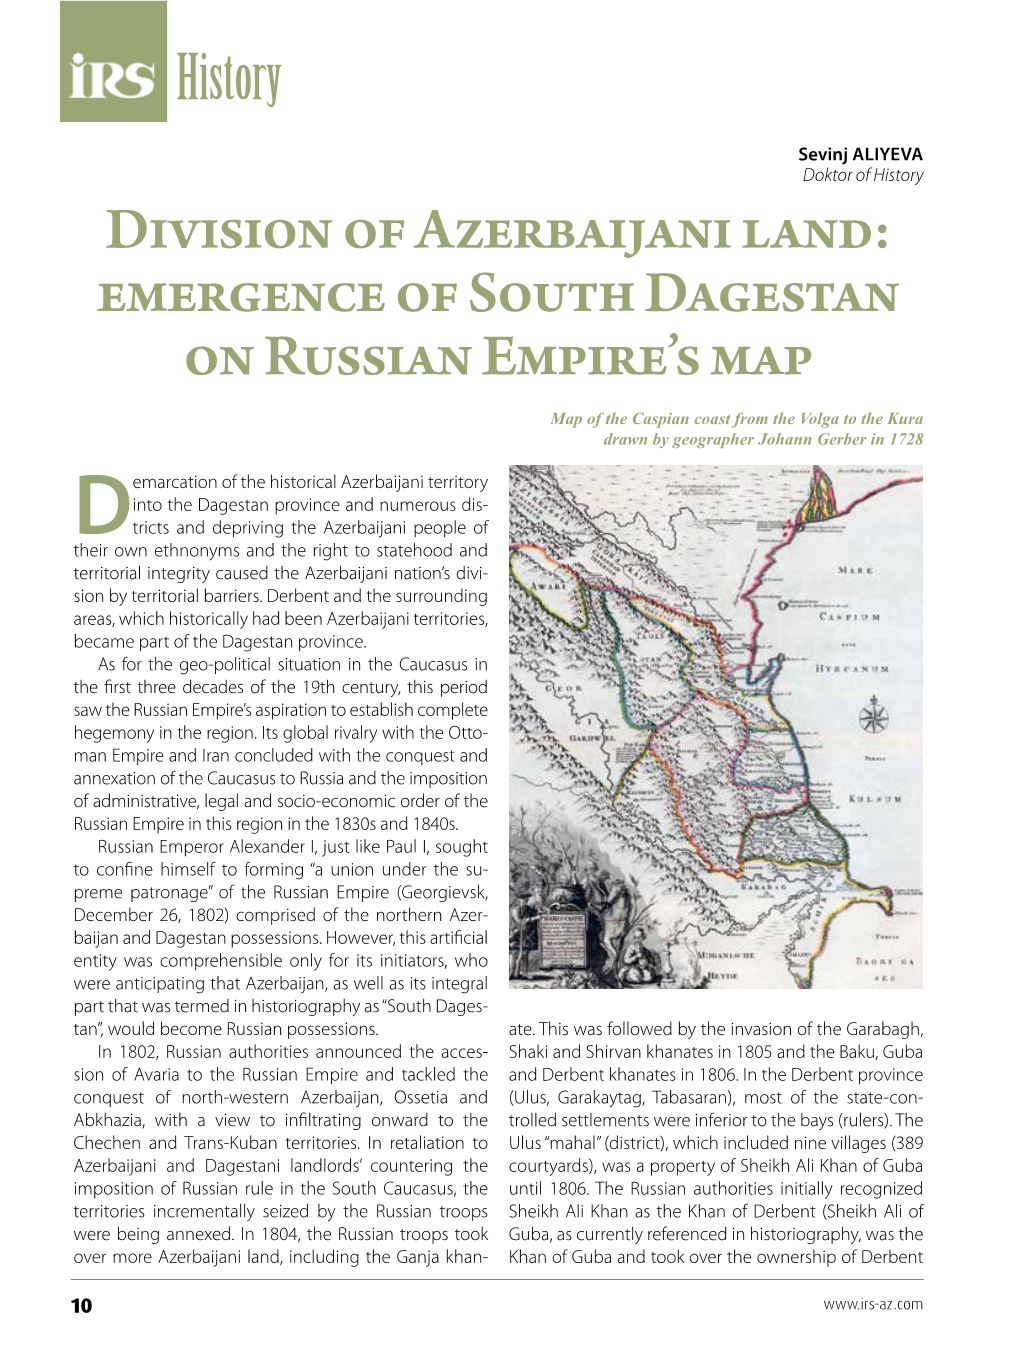 Division of Azerbaijani Land: Emergence of South Dagestan on Russian Empire's Map History